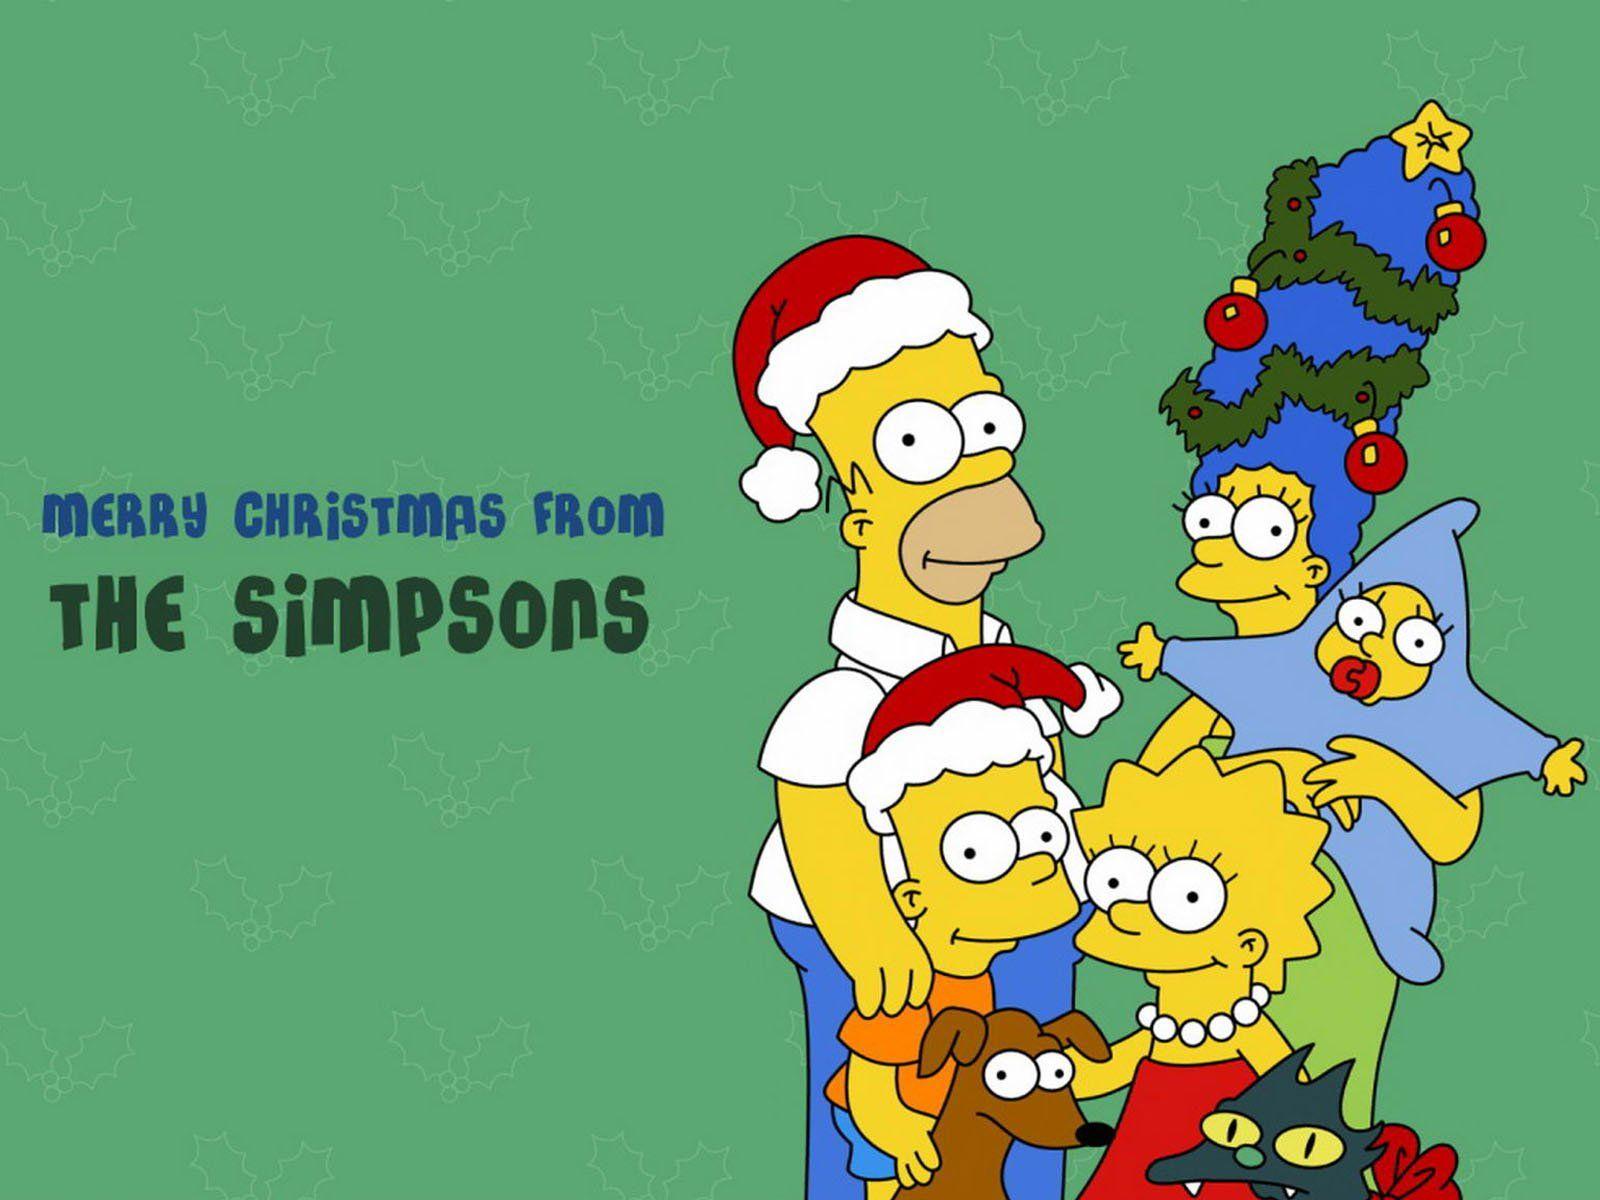 Merry Christmas from The Simpsons Wallpaper, Christmas Cartoons